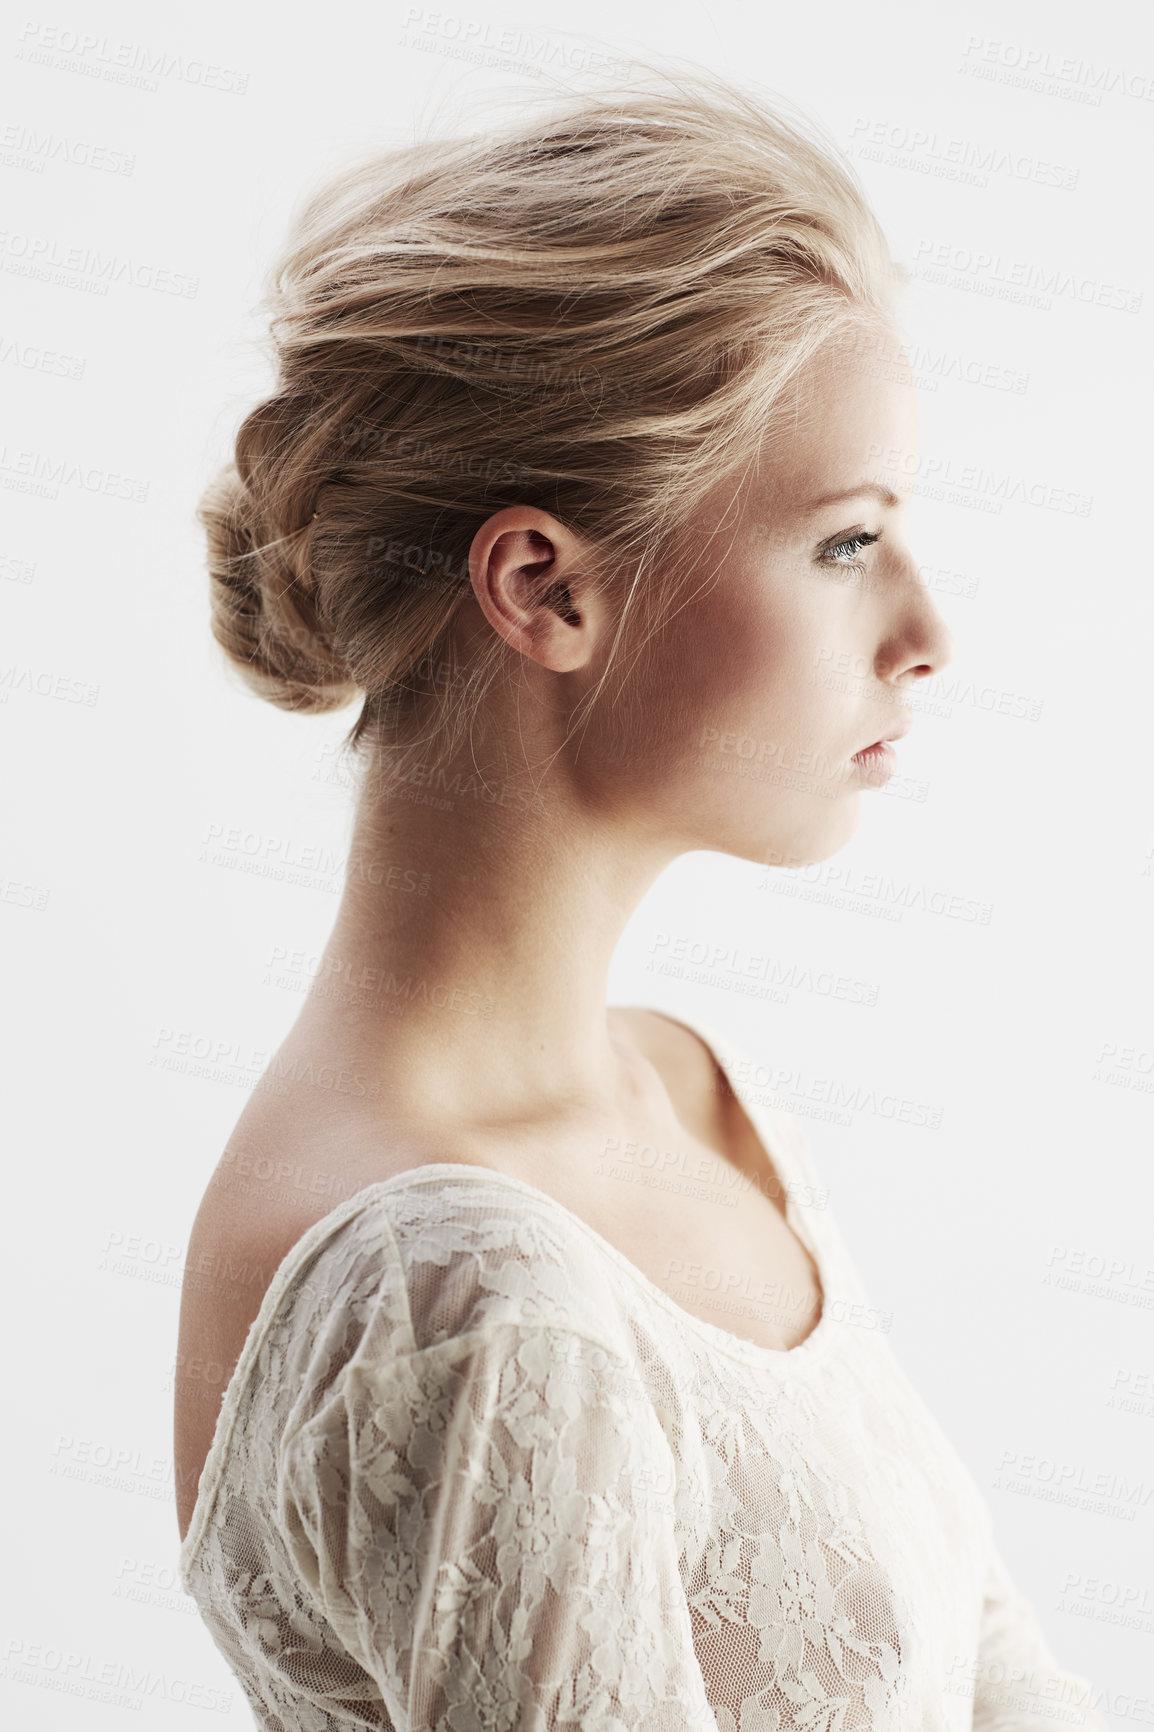 Buy stock photo A stunning young woman looking away thoughtfully